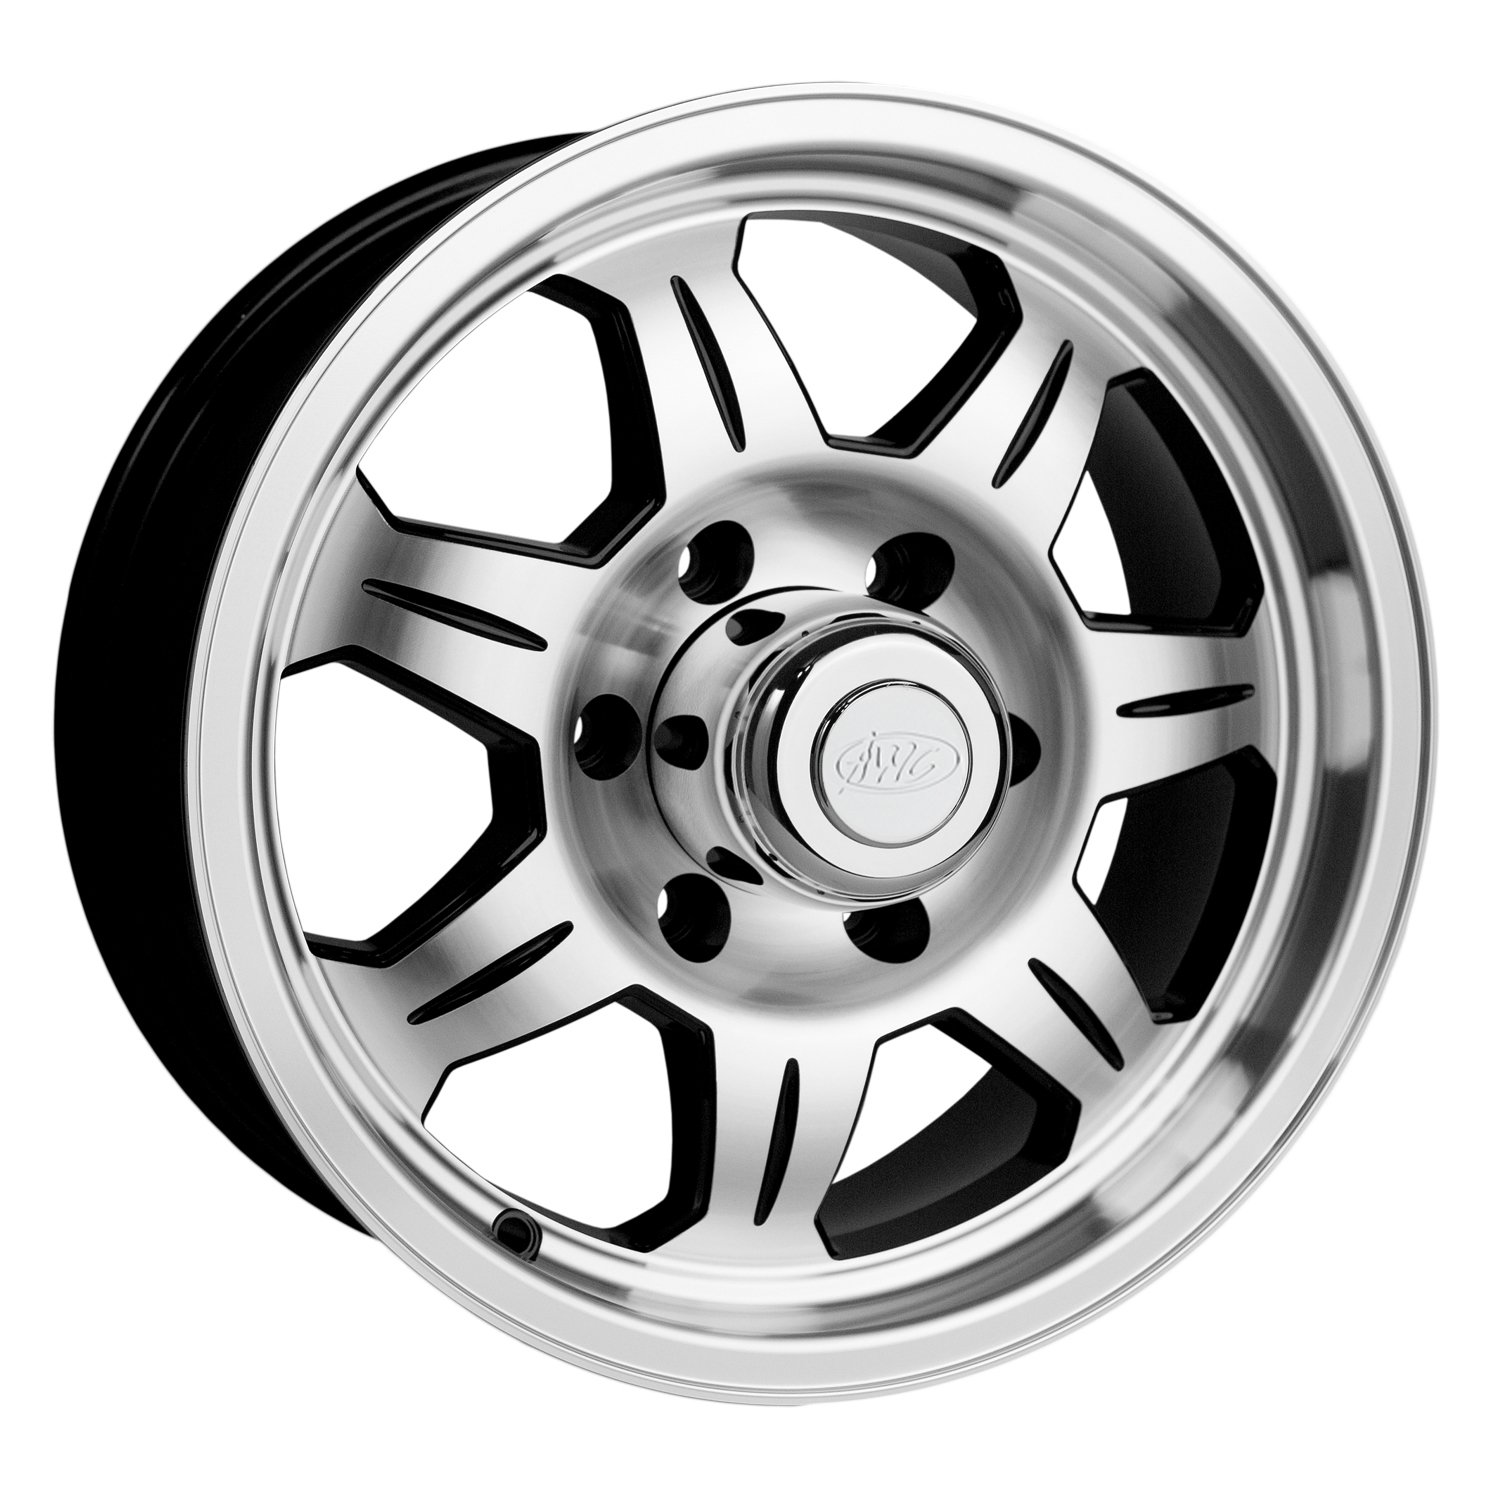 870 ELEMENT Trailer Wheel Size: 16 X 6" Bolt Pattern: 8 x 6.50" (165.10 mm) [Machined with Black Accents]